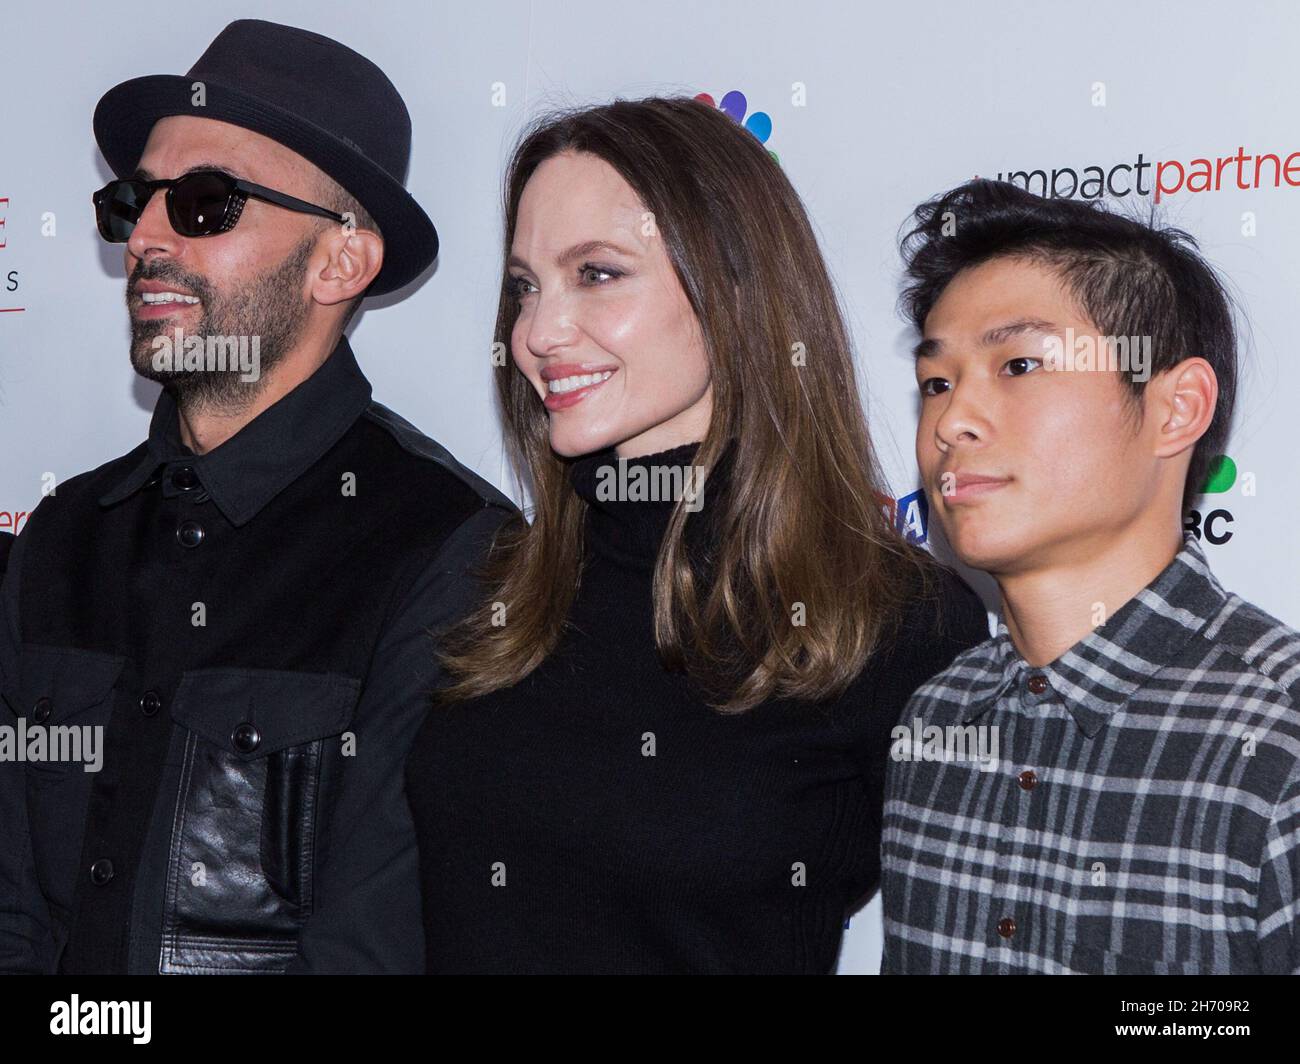 Los Angeles, United States. 18th Nov, 2021. LOS ANGELES, CALIFORNIA, USA - NOVEMBER 18: Street artist JR, actress Angelina Jolie and Pax Thien Jolie-Pitt arrive at the Los Angeles Premiere Of MSNBC Films' 'Paper & Glue: A JR Project' held at the Museum Of Tolerance on November 18, 2021 in Los Angeles, California, United States. (Photo by Rudy Torres/Image Press Agency) Credit: Image Press Agency/Alamy Live News Stock Photo